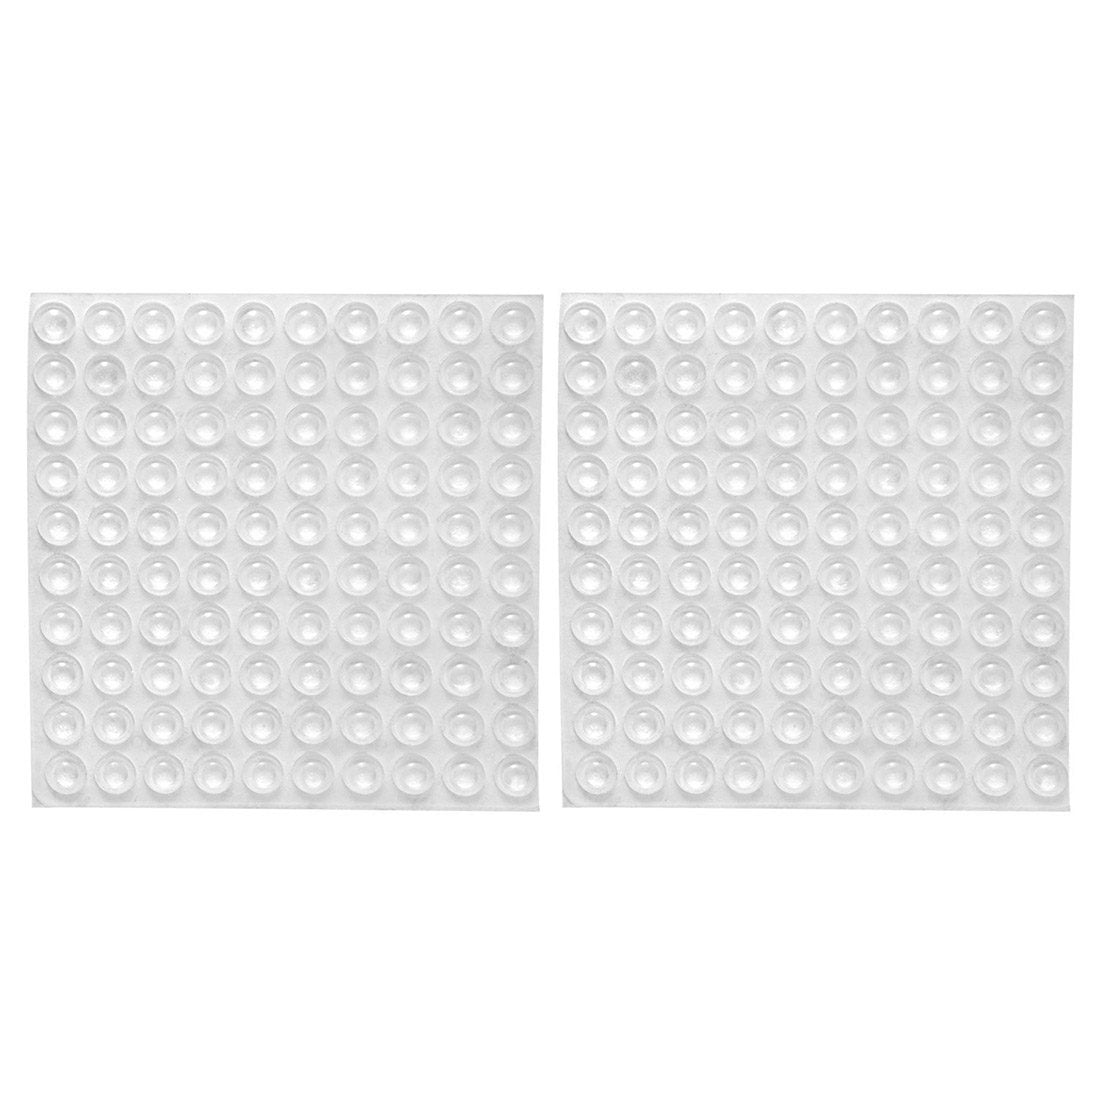 100 Pcs 0.3" Self-Adhesive Rubber Feet Round Door Bumpers Buffer Pad Protector 